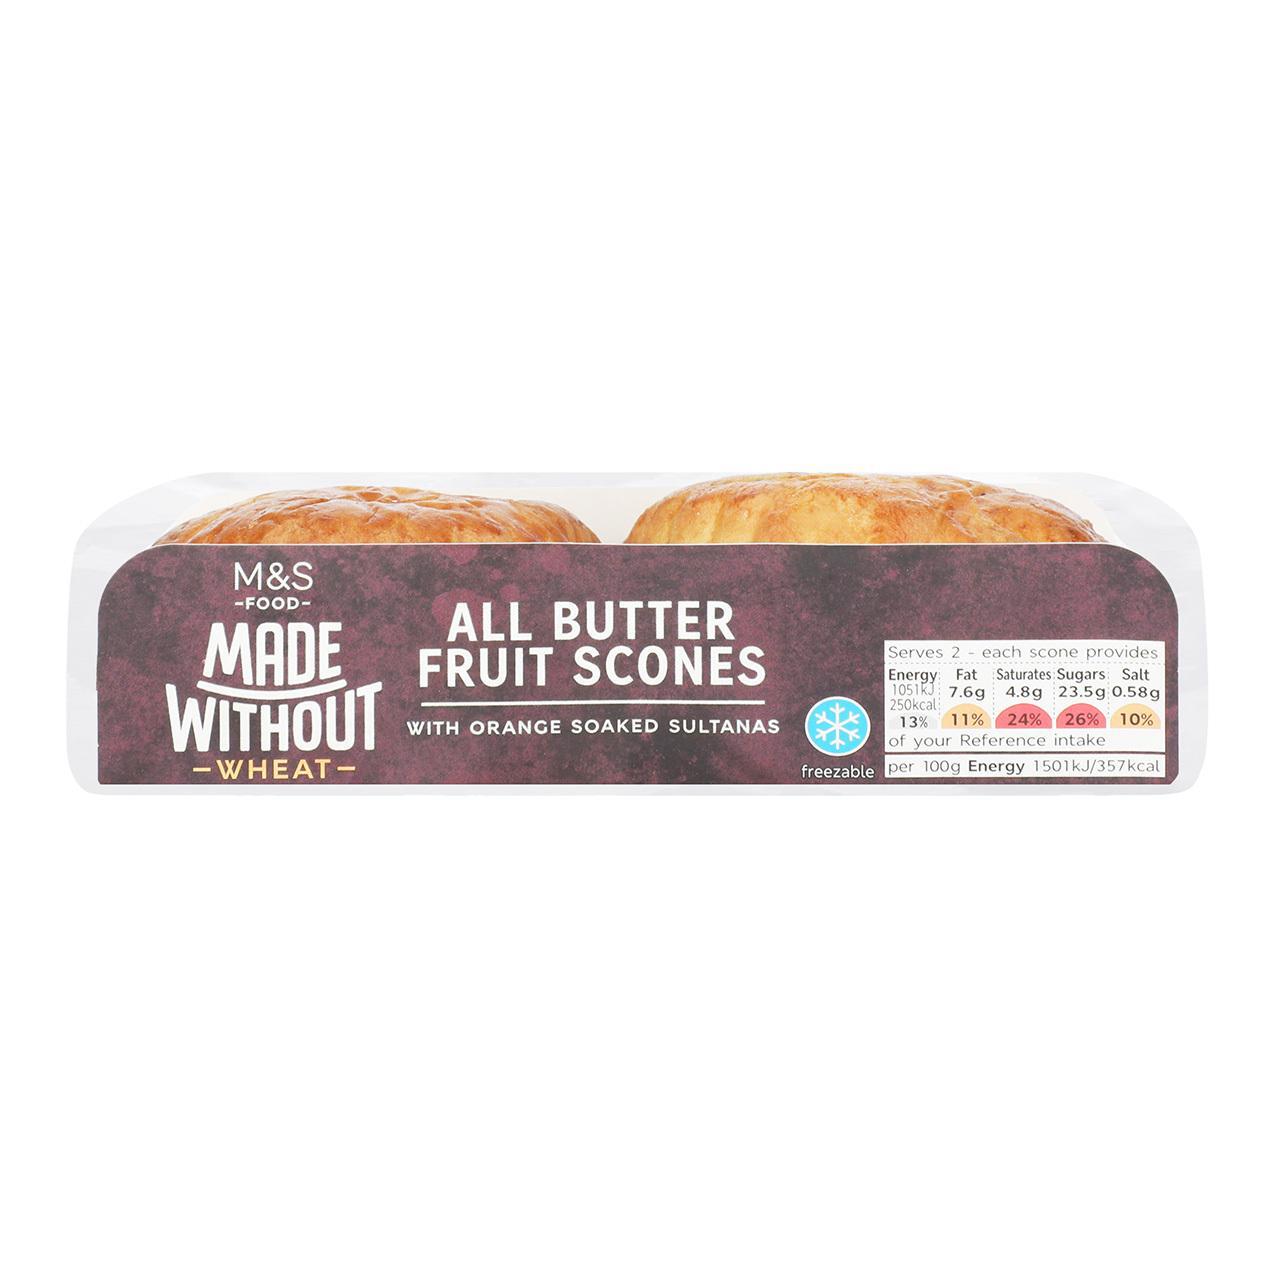 M&S Made Without All Butter Fruit Scones 2 per pack